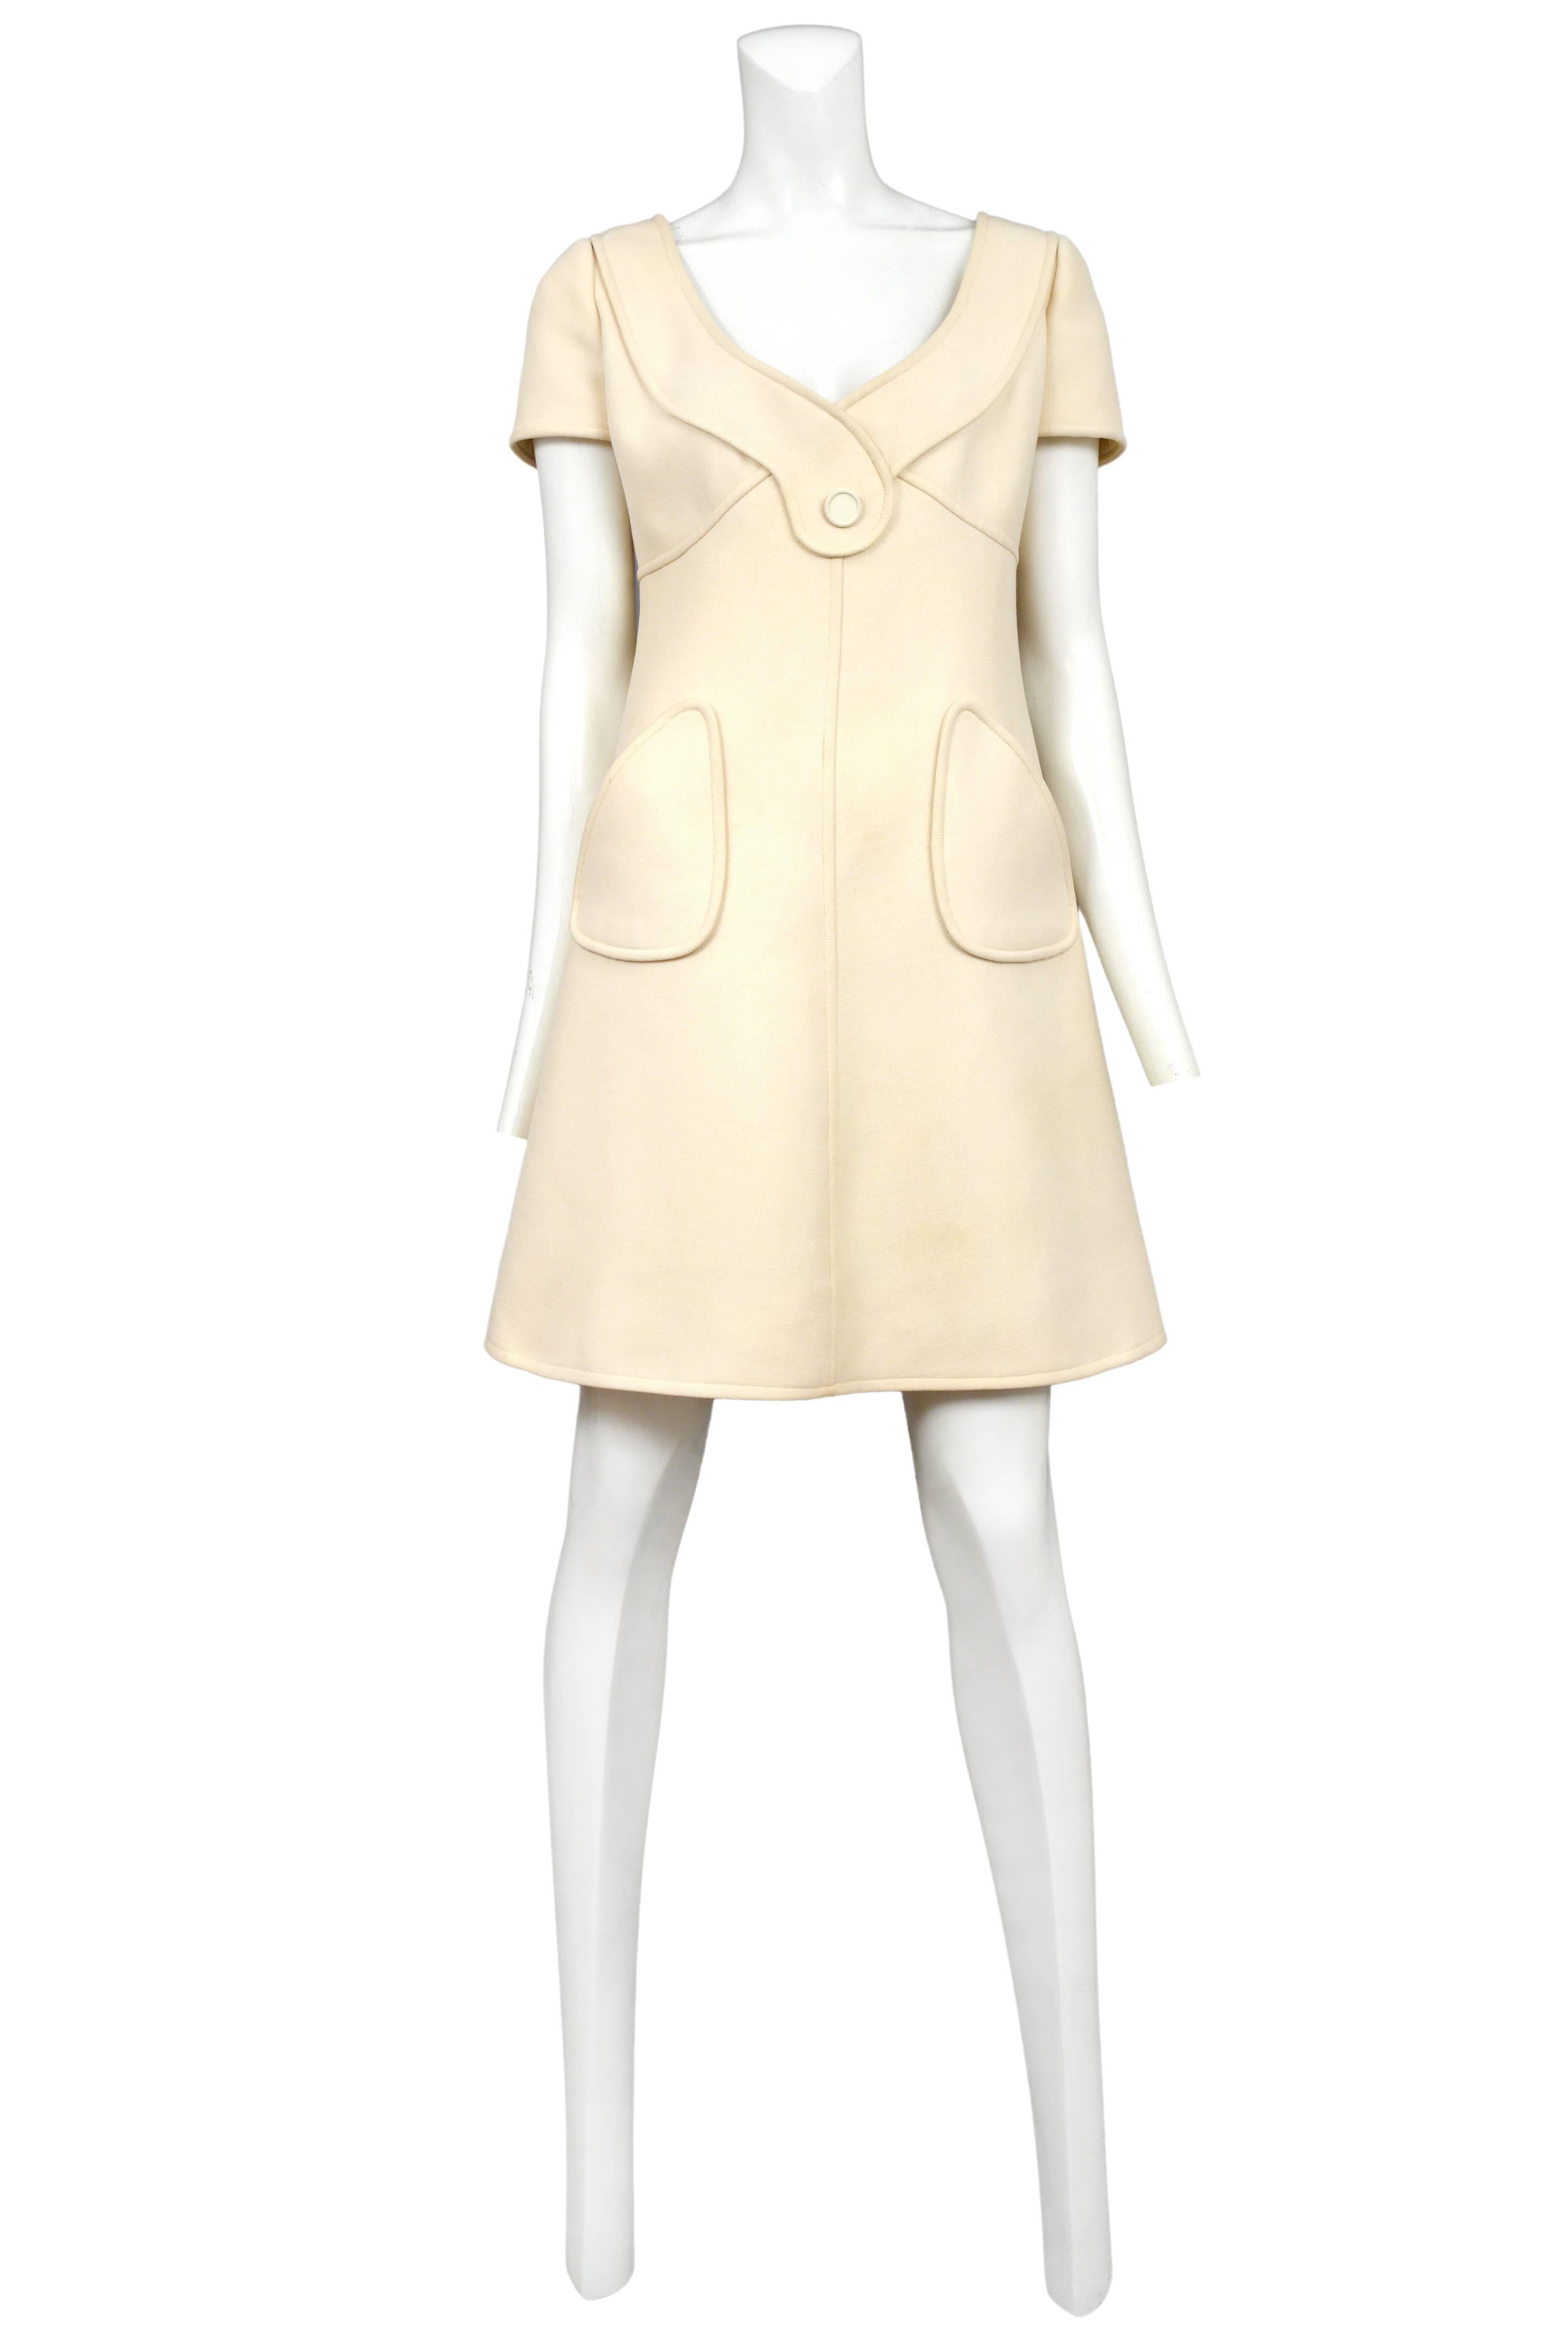 Vintage Courreges cream mod a-line dress featuring short sleeves, a button detail at the front neckline and pockets at the hips.
Please inquire for additional images.